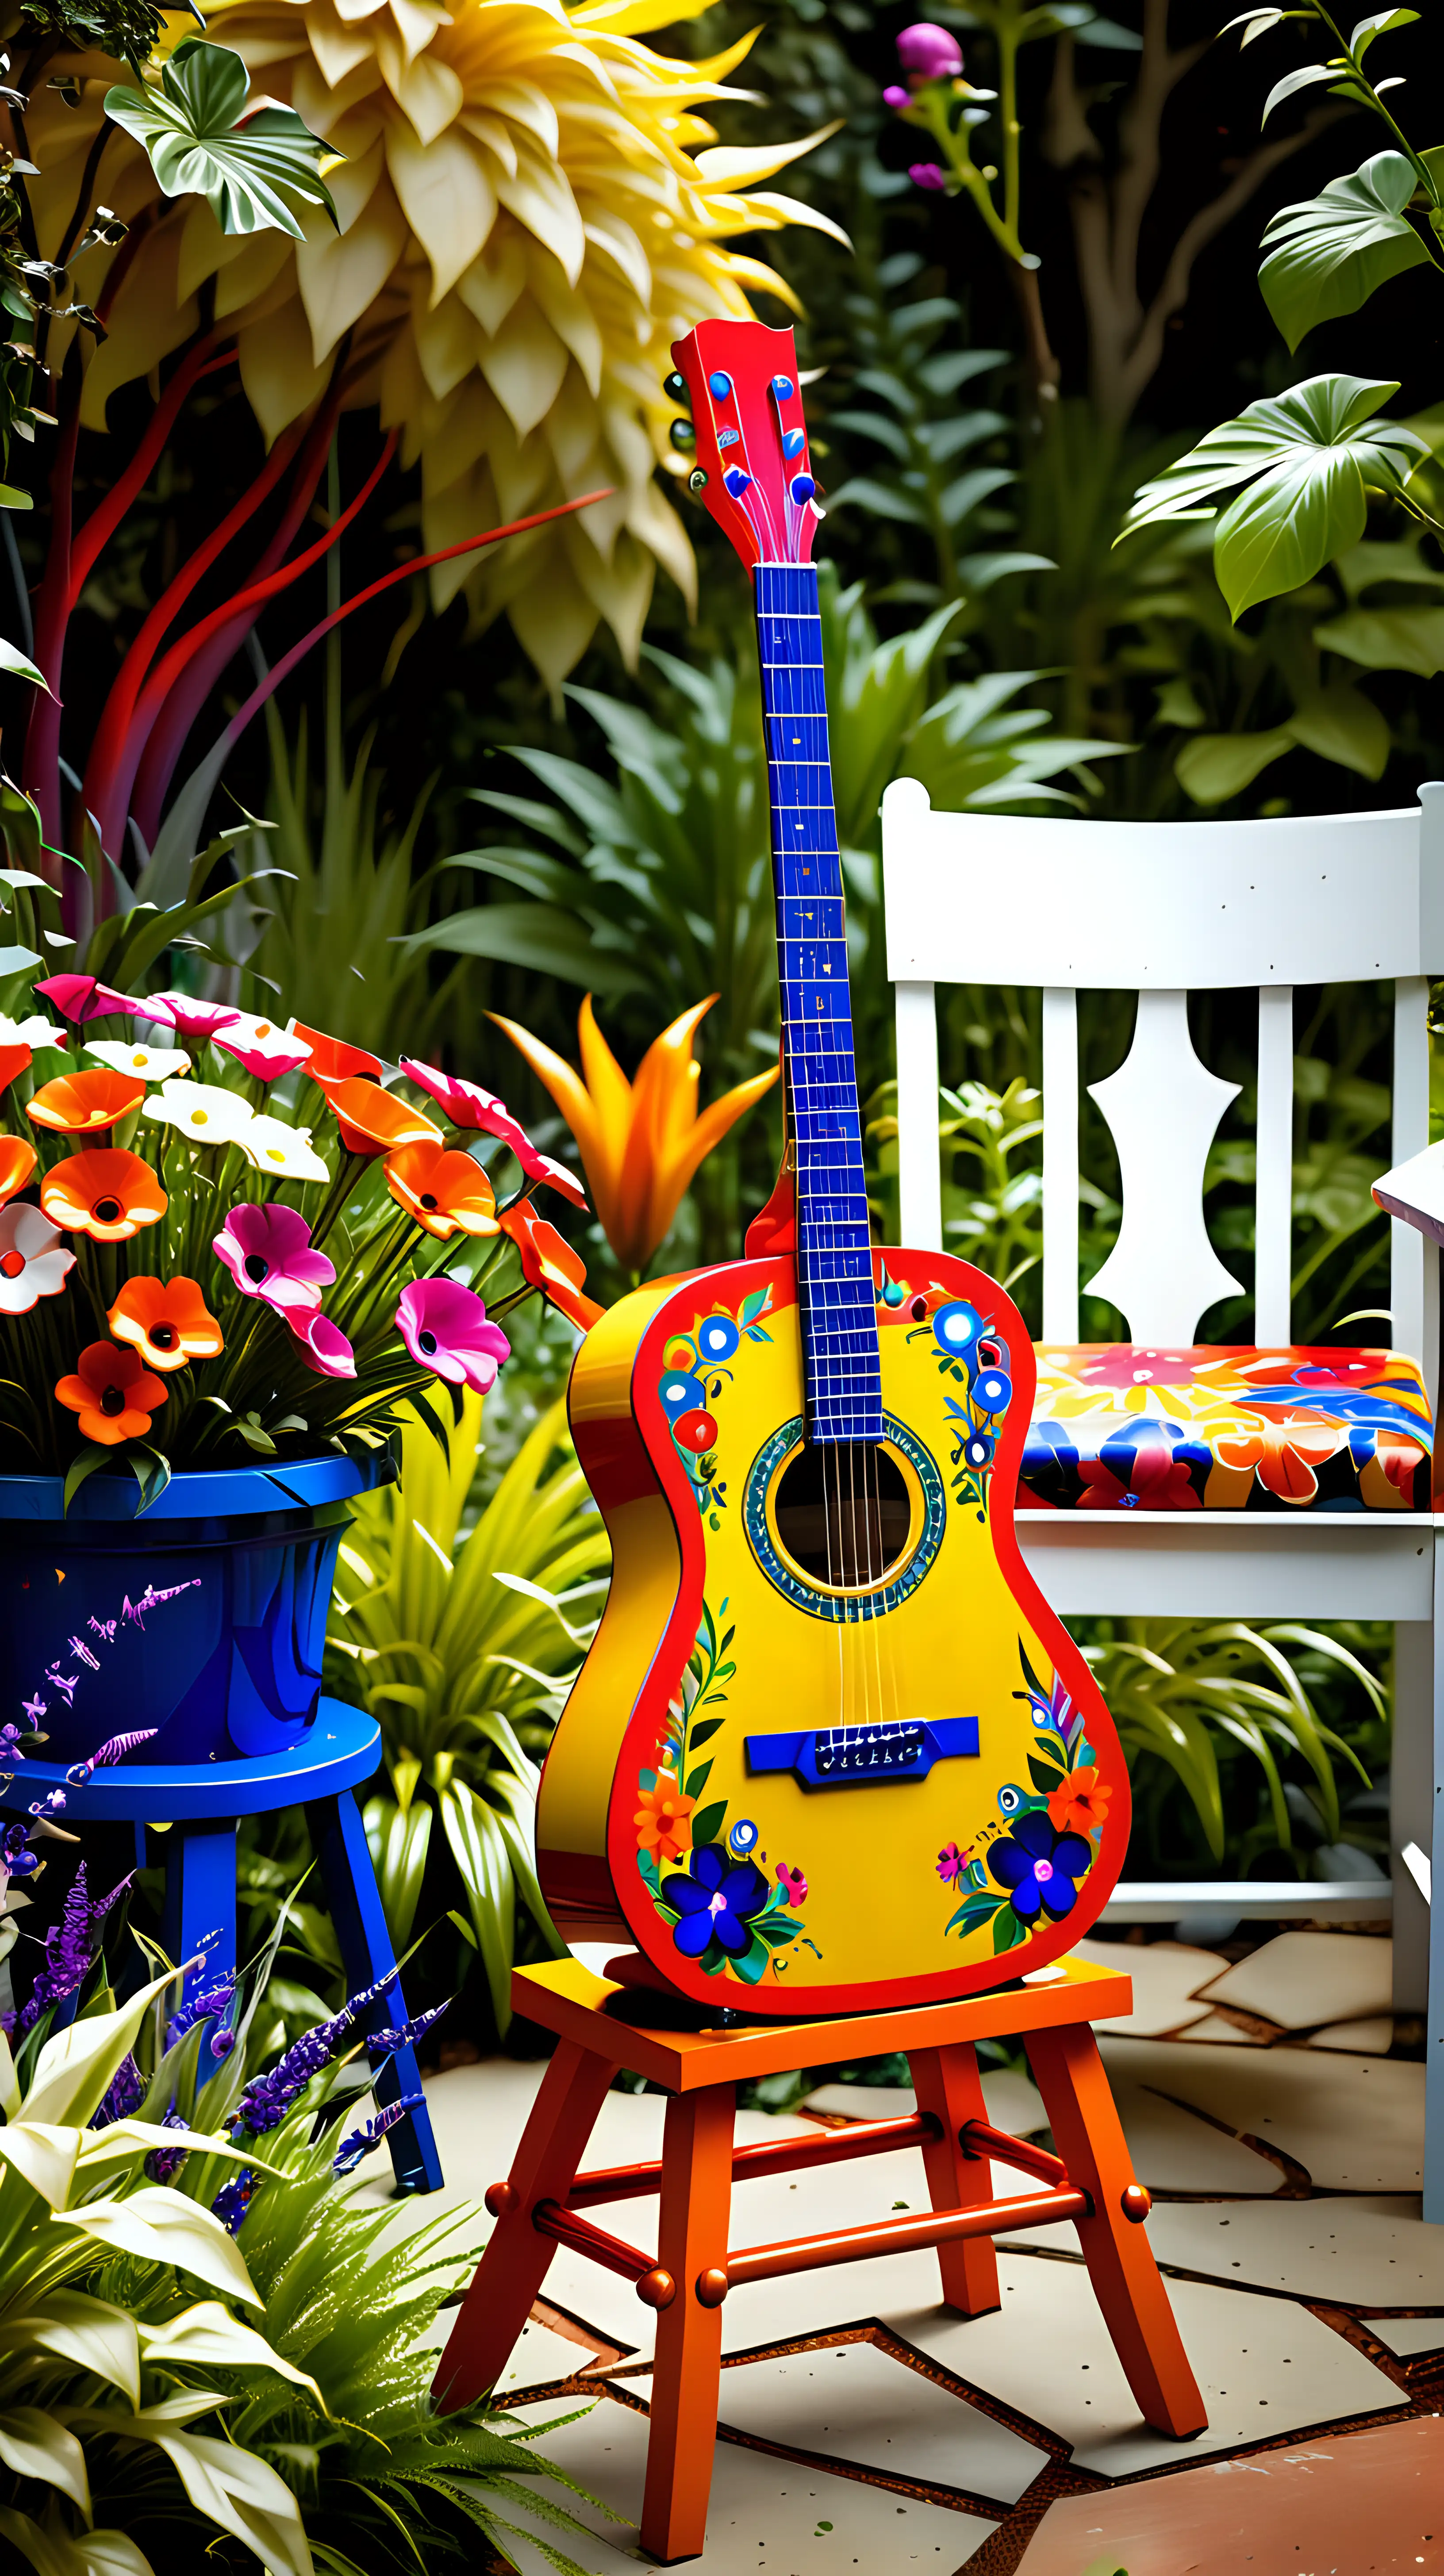 Vibrant Floral Garden Setting with Colorful Guitar on Artistic Stool